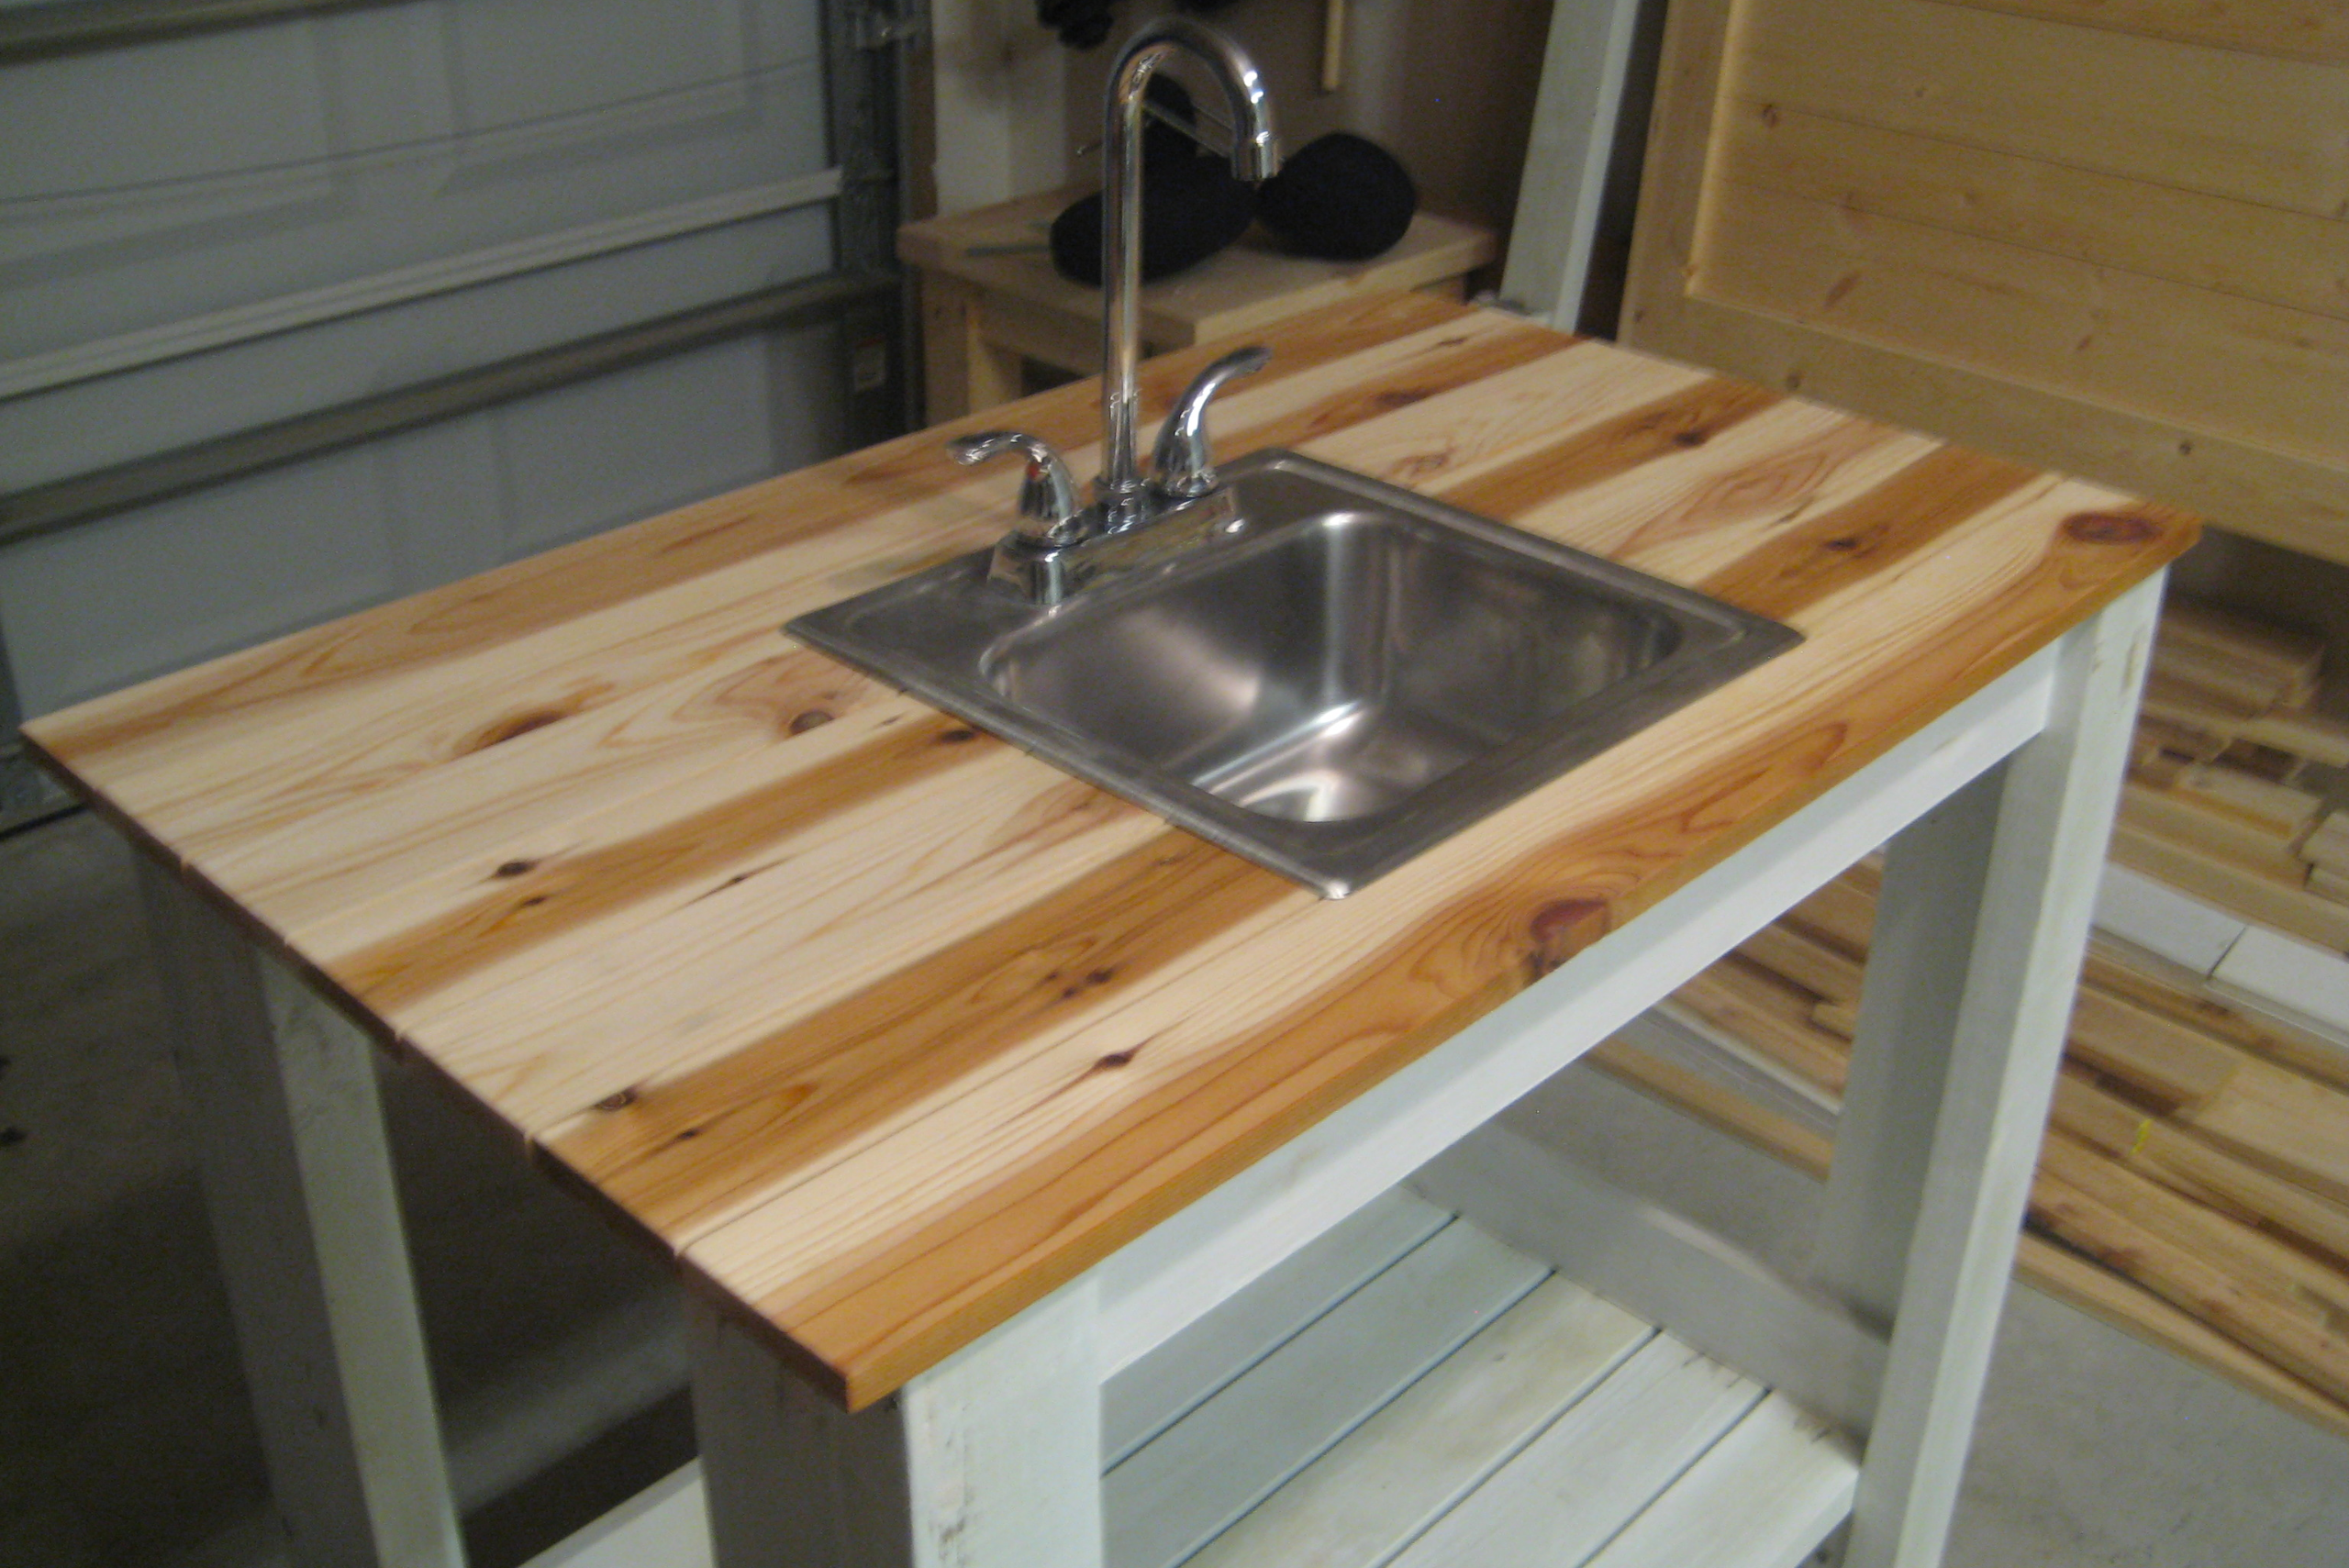 A wooden outdoor sink and prep station.